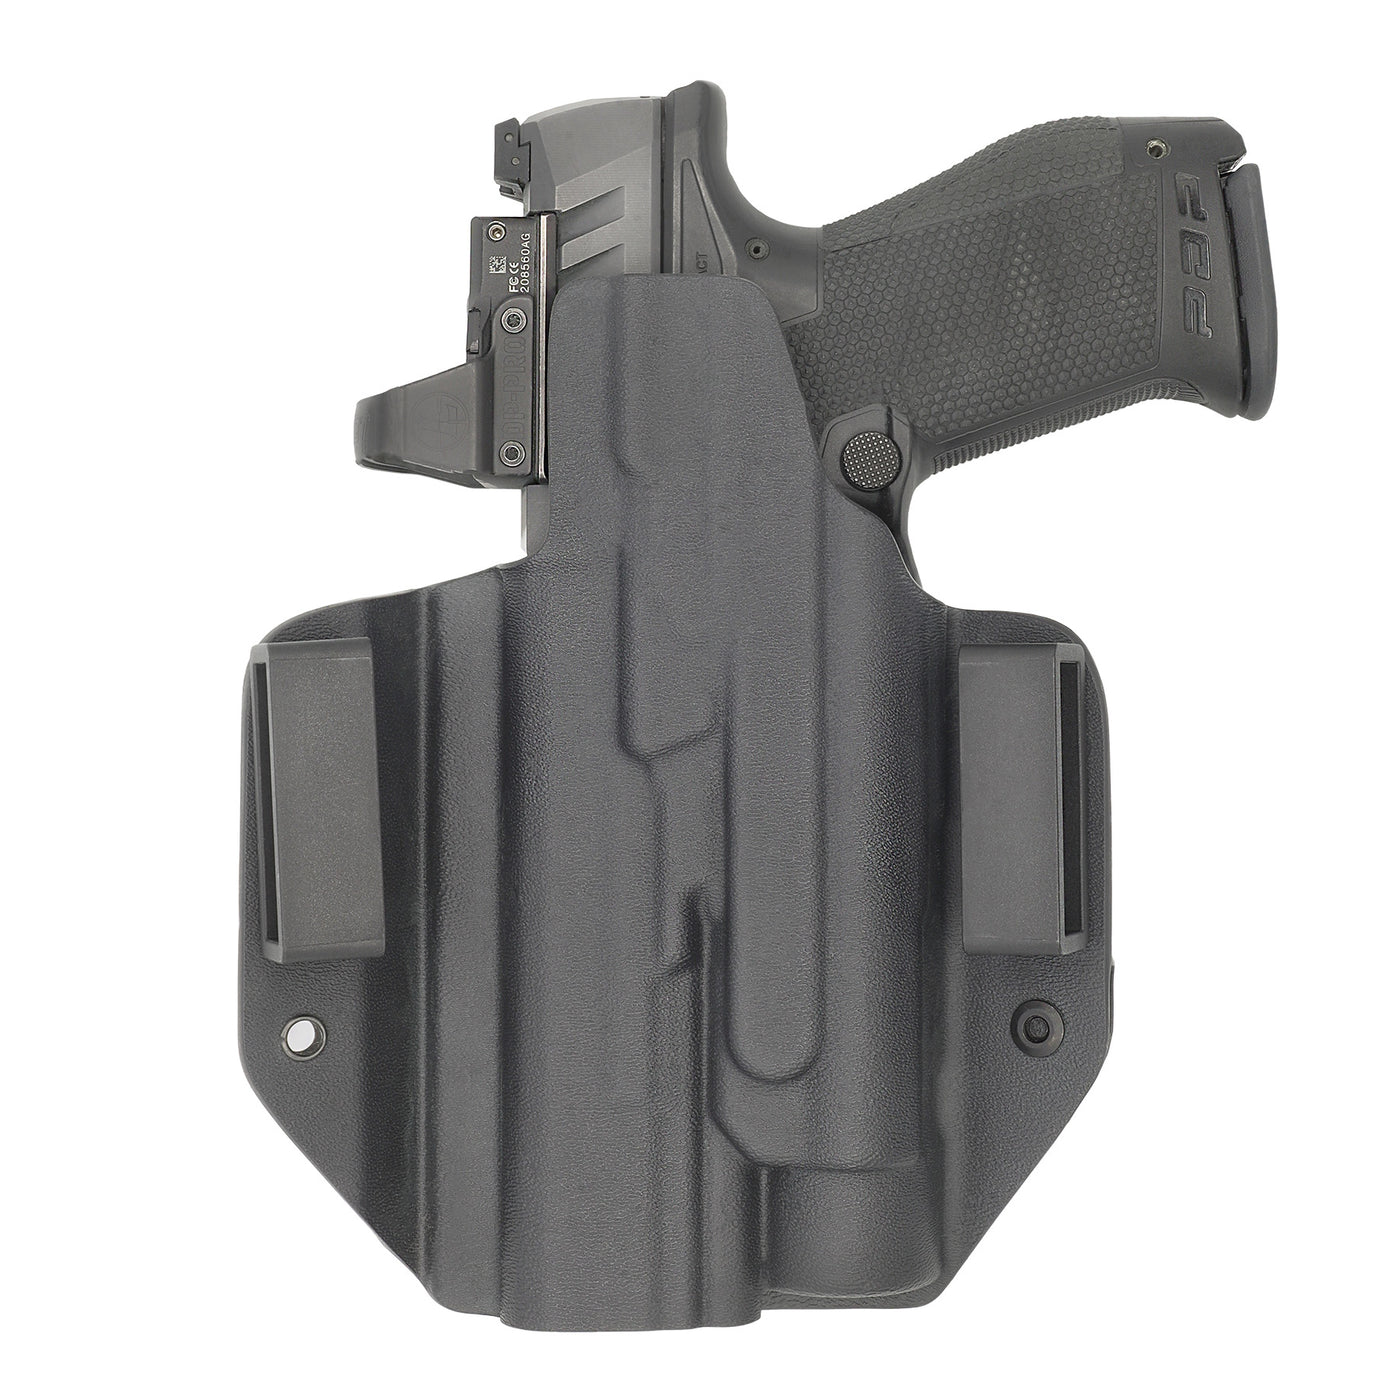 C&G Holsters quickship OWB Tactical CZ Shadow 2 Streamlight TLR1 in holstered position back view